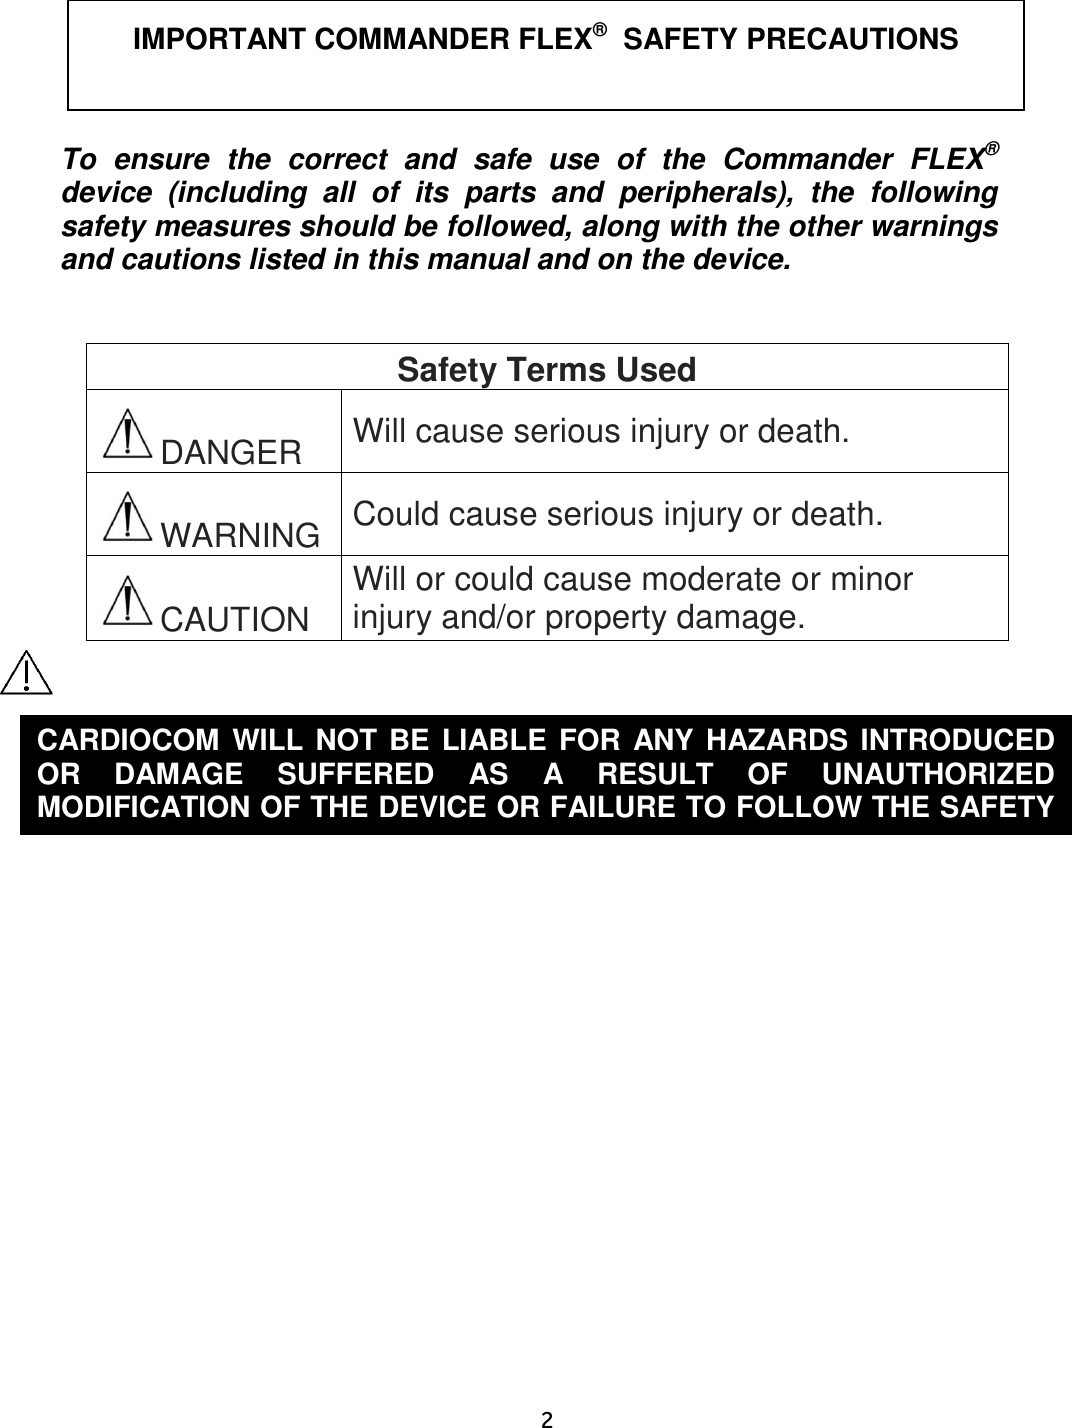     2   To  ensure  the  correct  and  safe  use  of  the  Commander  FLEX® device  (including  all  of  its  parts  and  peripherals),  the  following safety measures should be followed, along with the other warnings and cautions listed in this manual and on the device.   Safety Terms Used DANGER Will cause serious injury or death. WARNING Could cause serious injury or death. CAUTION Will or could cause moderate or minor injury and/or property damage.       IMPORTANT COMMANDER FLEX®  SAFETY PRECAUTIONS CARDIOCOM WILL NOT BE LIABLE FOR ANY HAZARDS INTRODUCED OR  DAMAGE  SUFFERED  AS  A  RESULT  OF  UNAUTHORIZED MODIFICATION OF THE DEVICE OR FAILURE TO FOLLOW THE SAFETY PRECAUTIONS IN THIS MANUAL.  